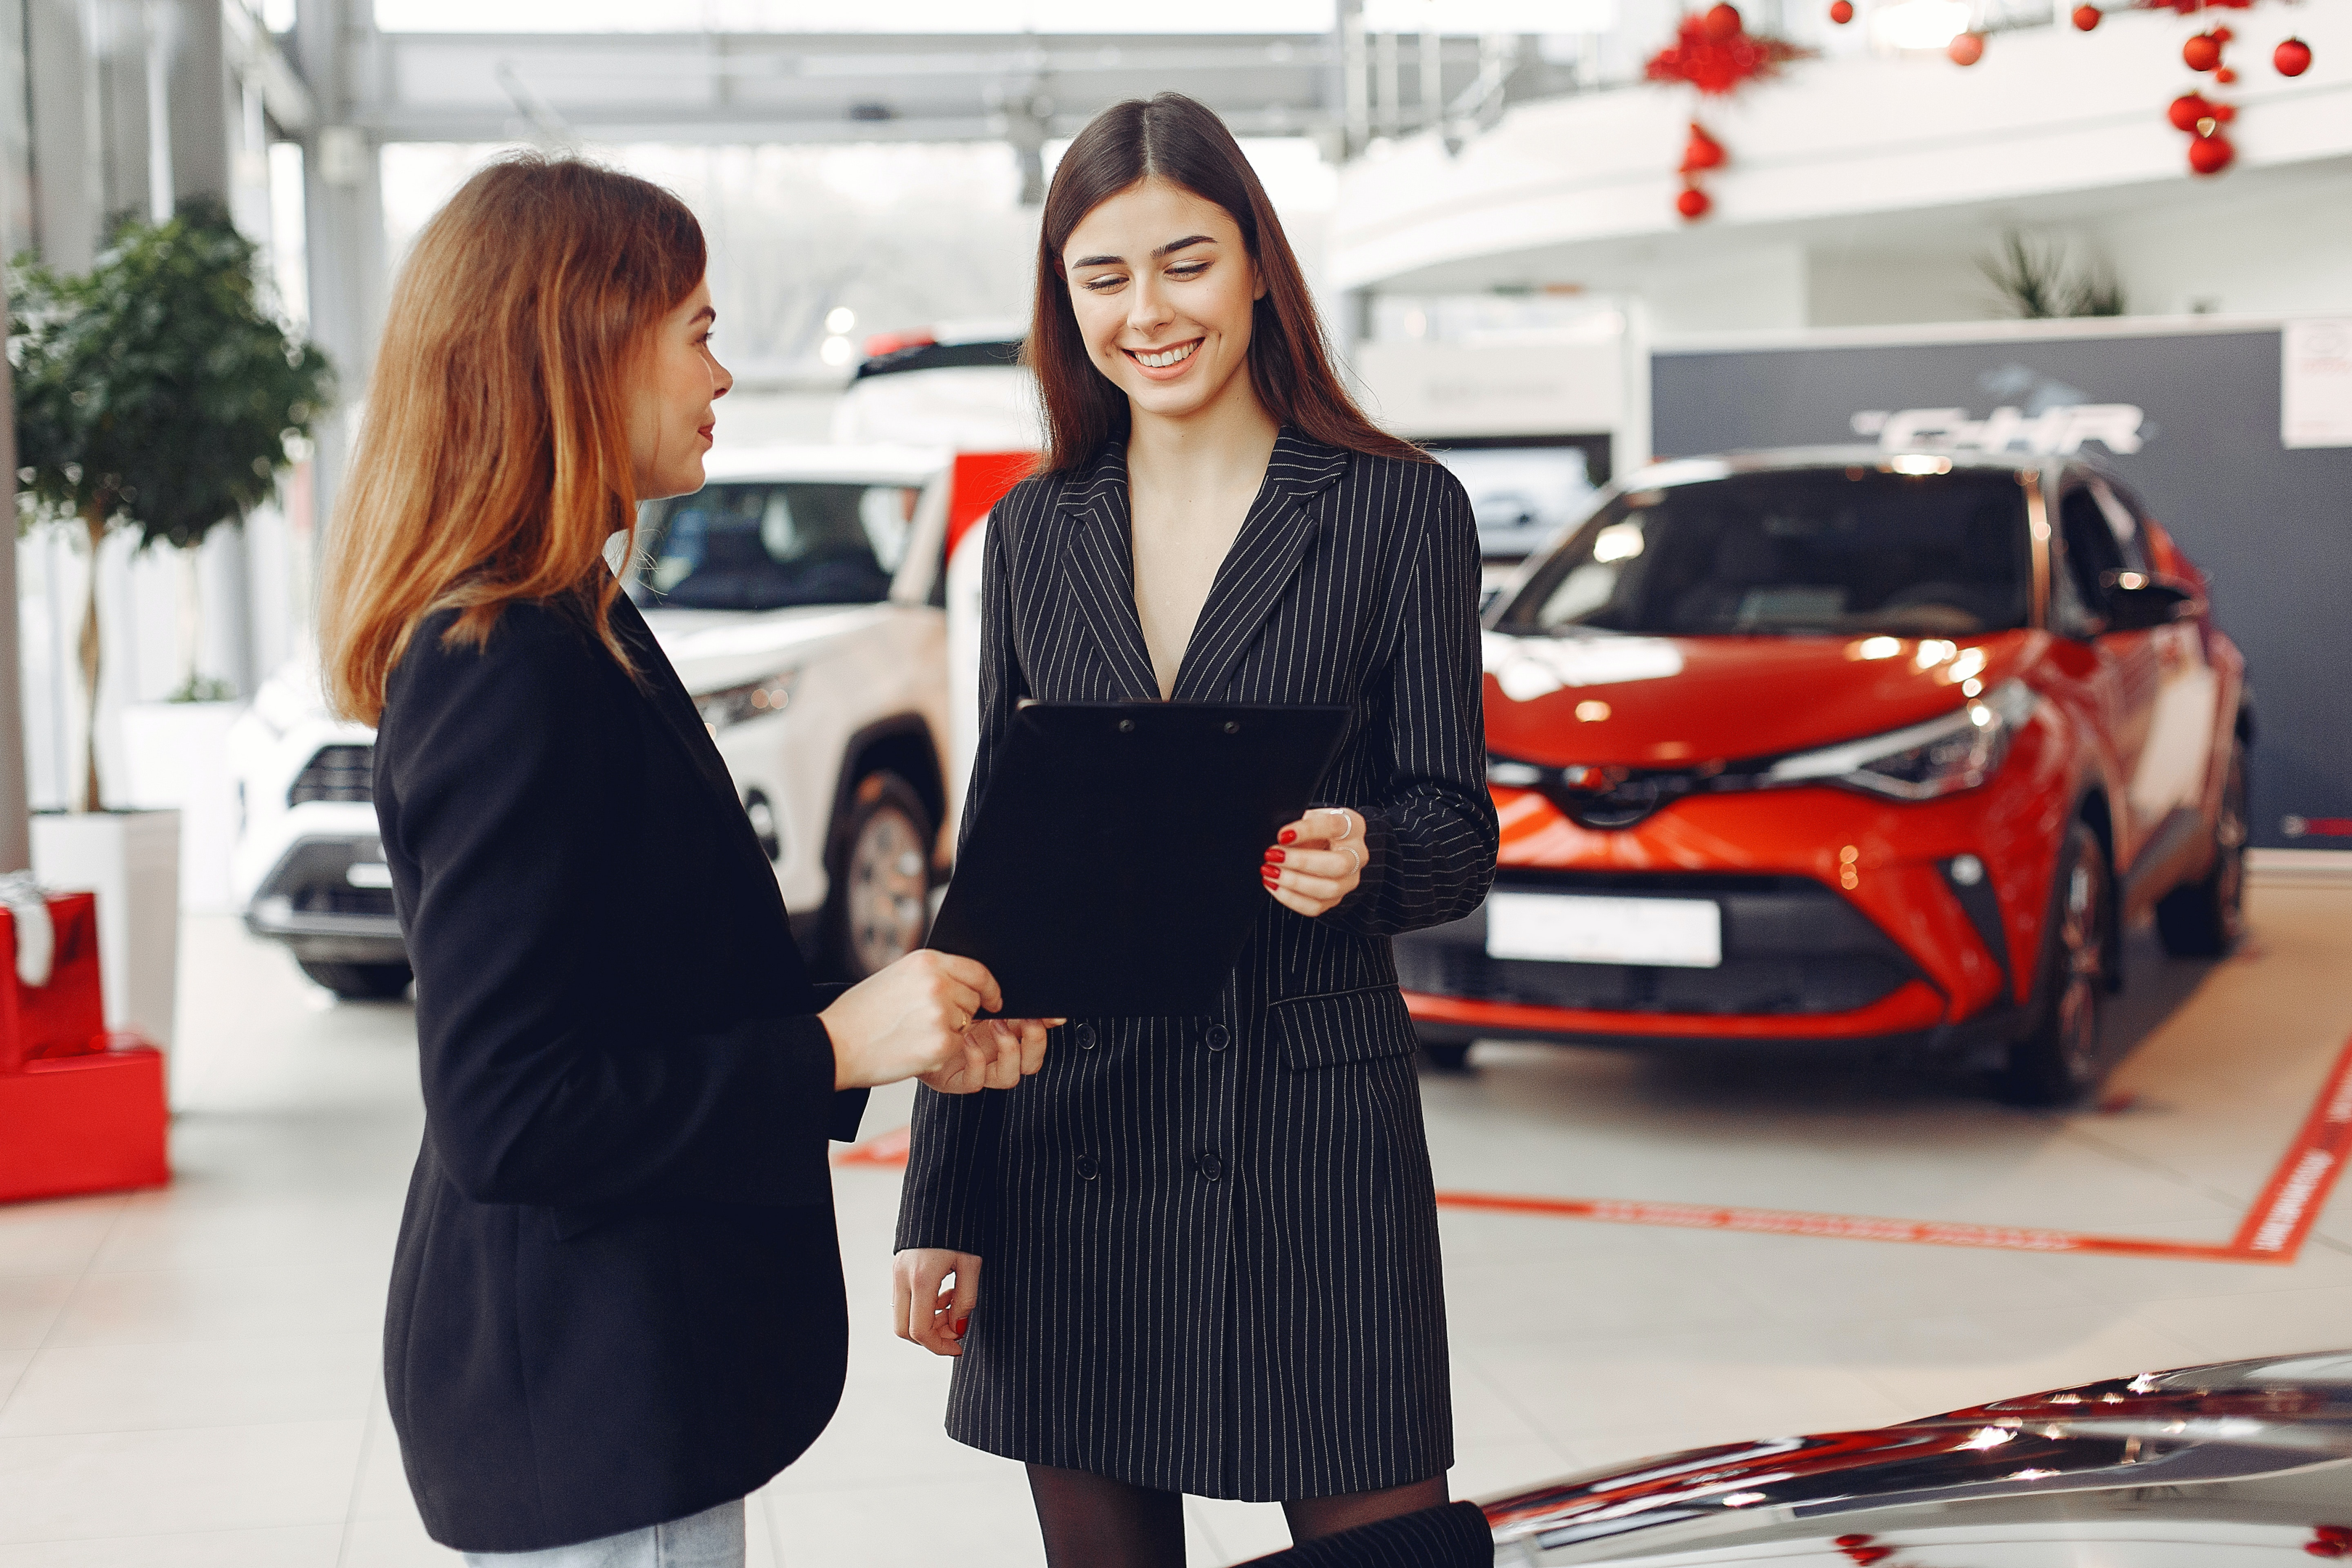 Used cars are in high demand